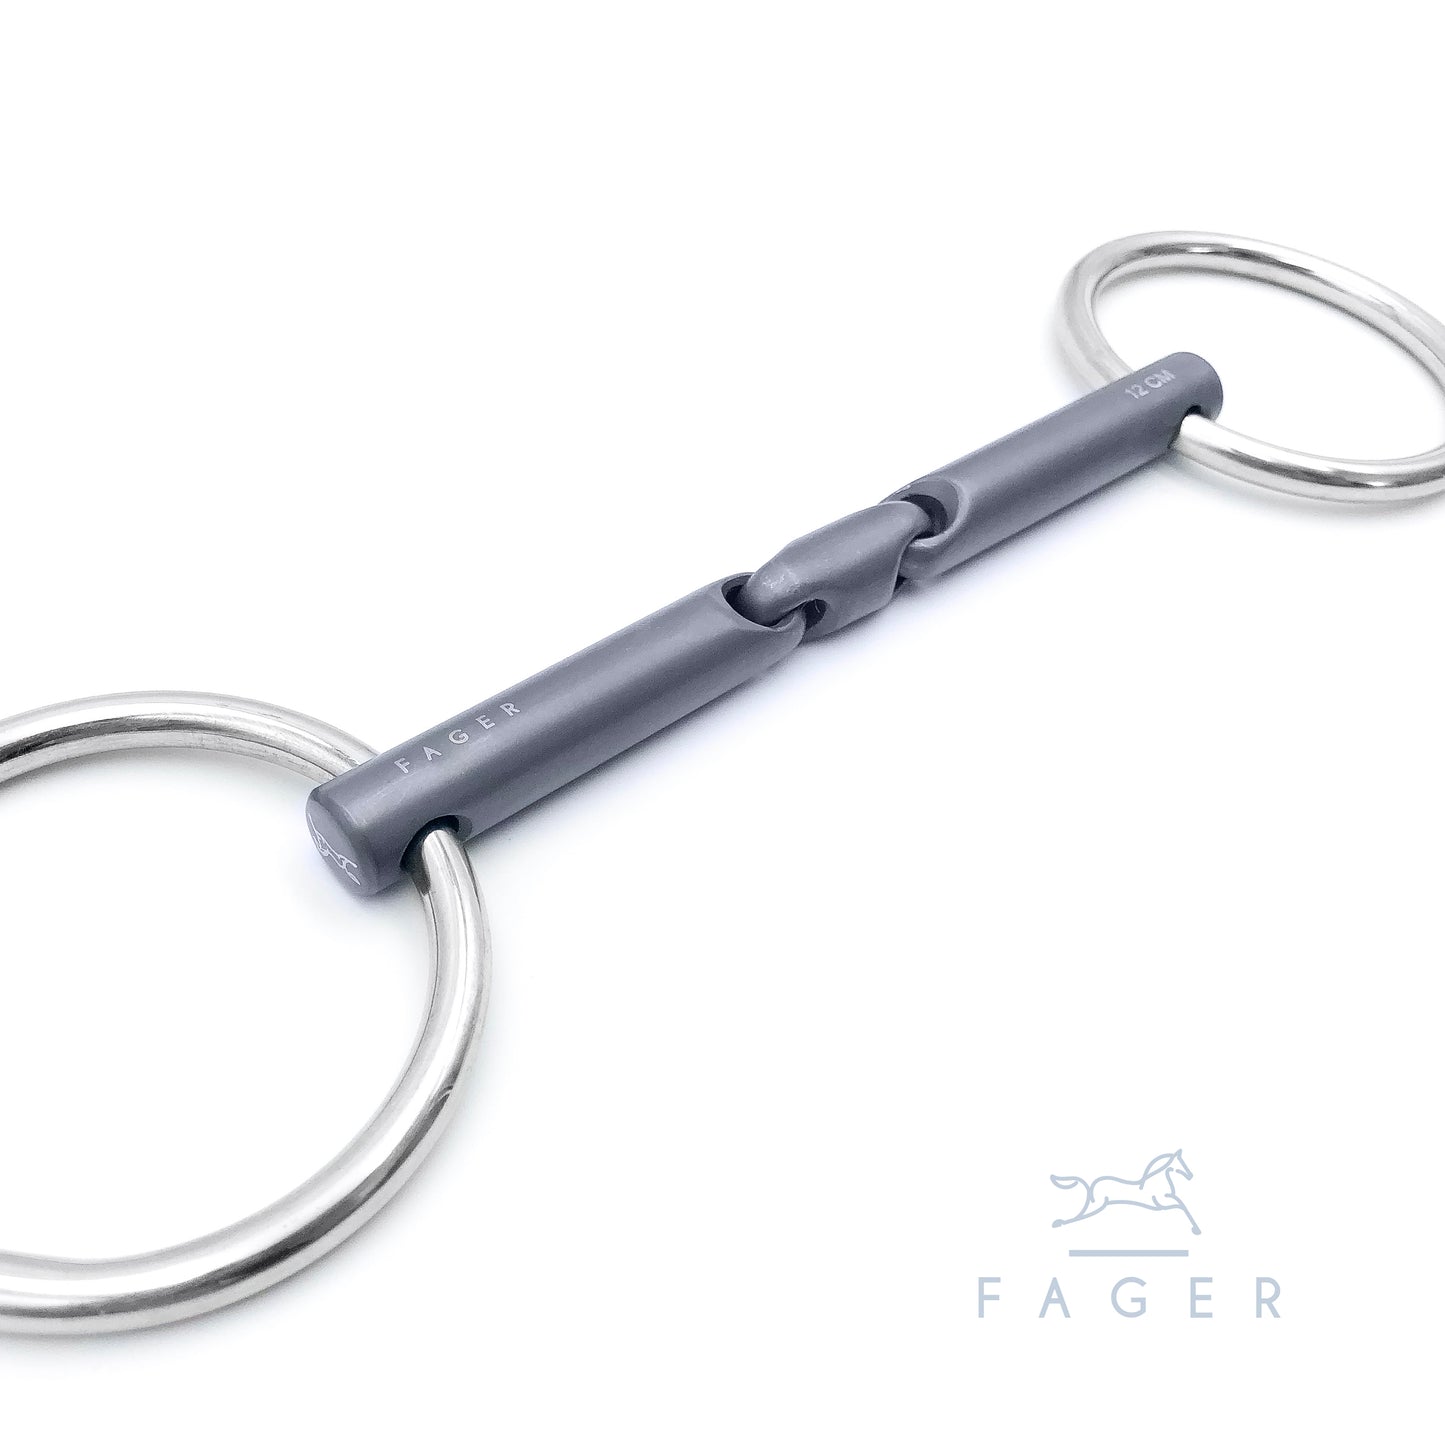 FAGER "Madeleine" Titanium Single/Double Jointed Bridoon Bit - Ex Display no tags